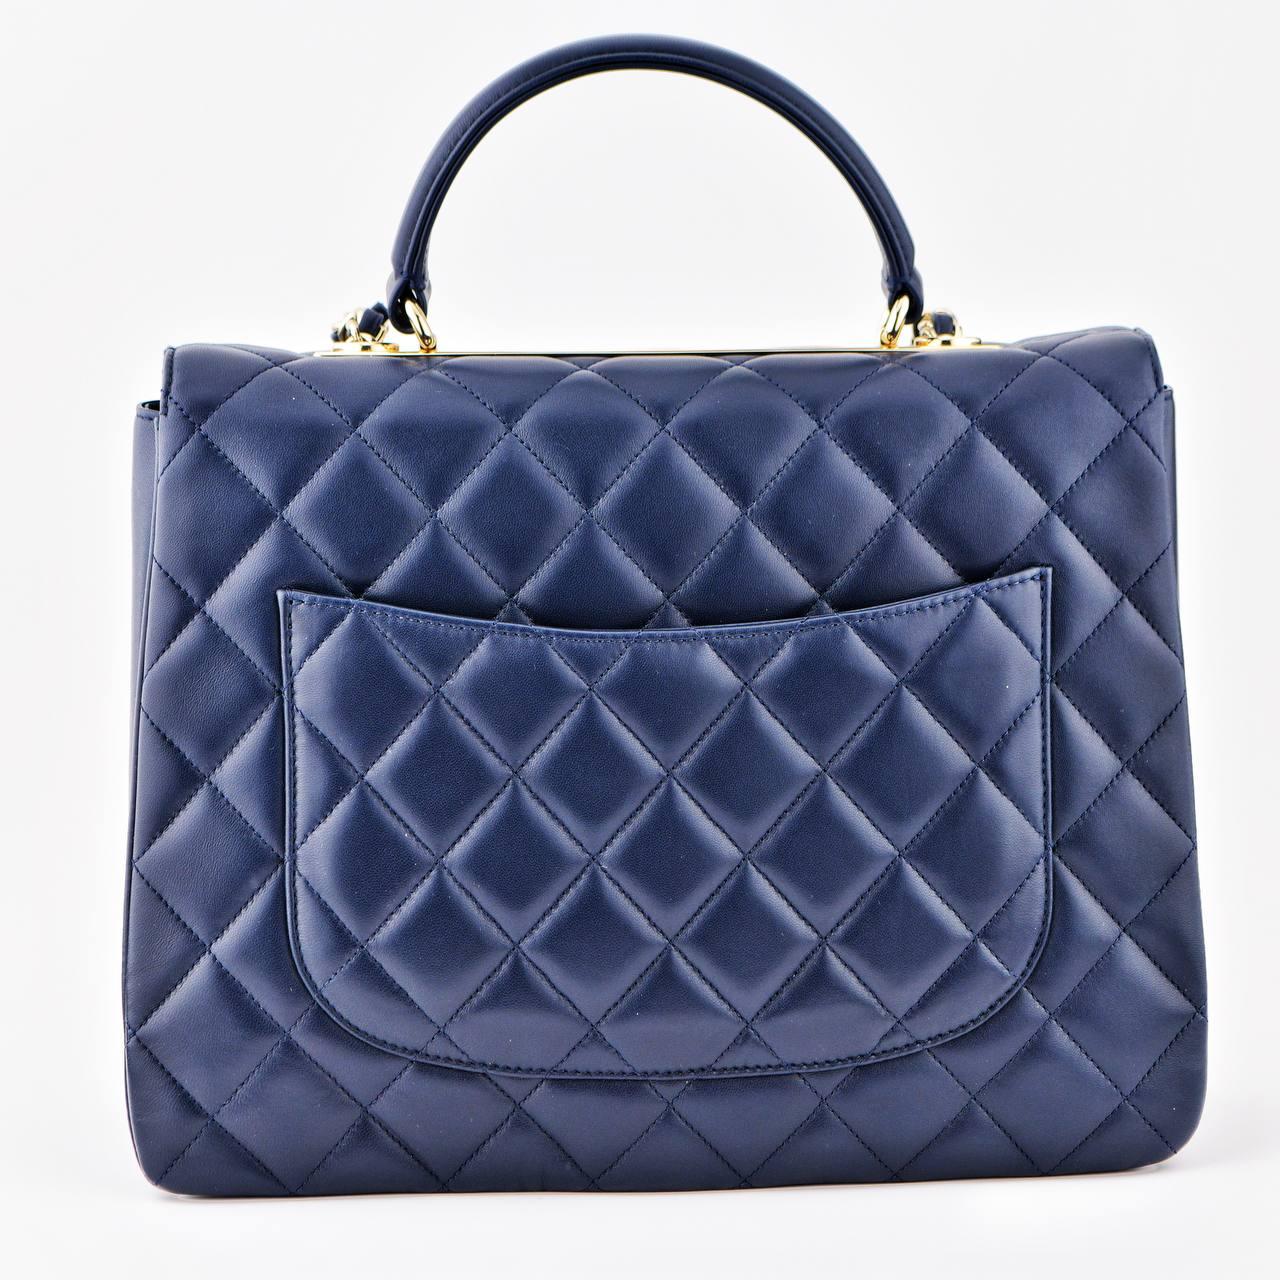 Chanel Large Trendy CC Top Handle Flap Bag in Navy Lambskin For Sale 4